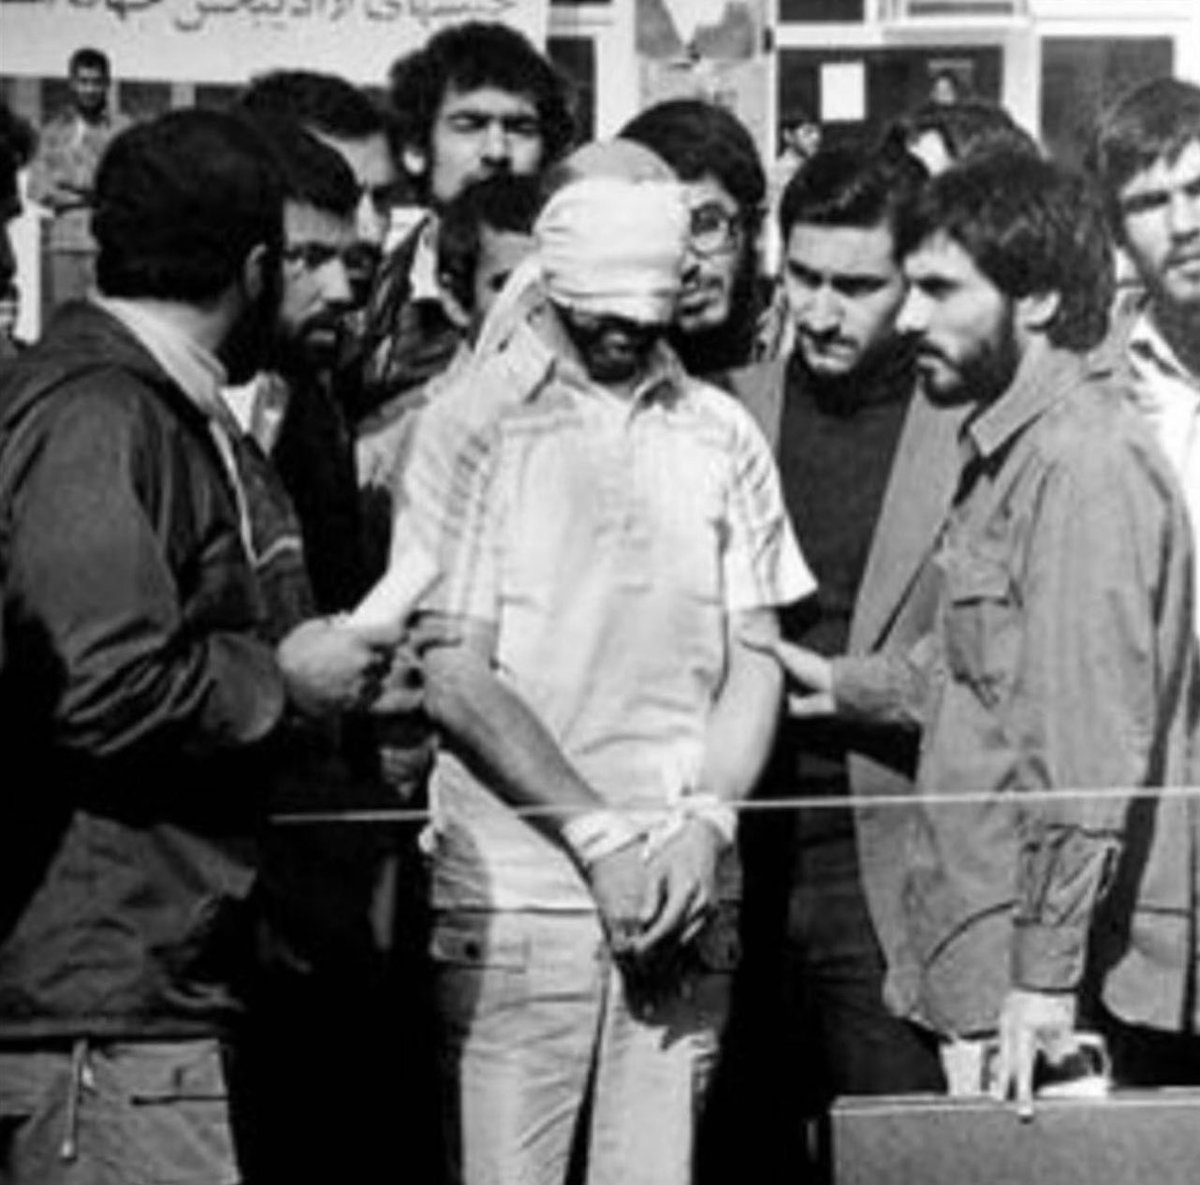 On November 4th, 1979, over 300 Iranian college students stormed the U.S. Embassy in Tehran, Iran, taking sixty-six Americans hostage. 52 of them would be held captive for 444 days. Hit the link for additional information. instagram.com/p/Cki2d05p1qv/…